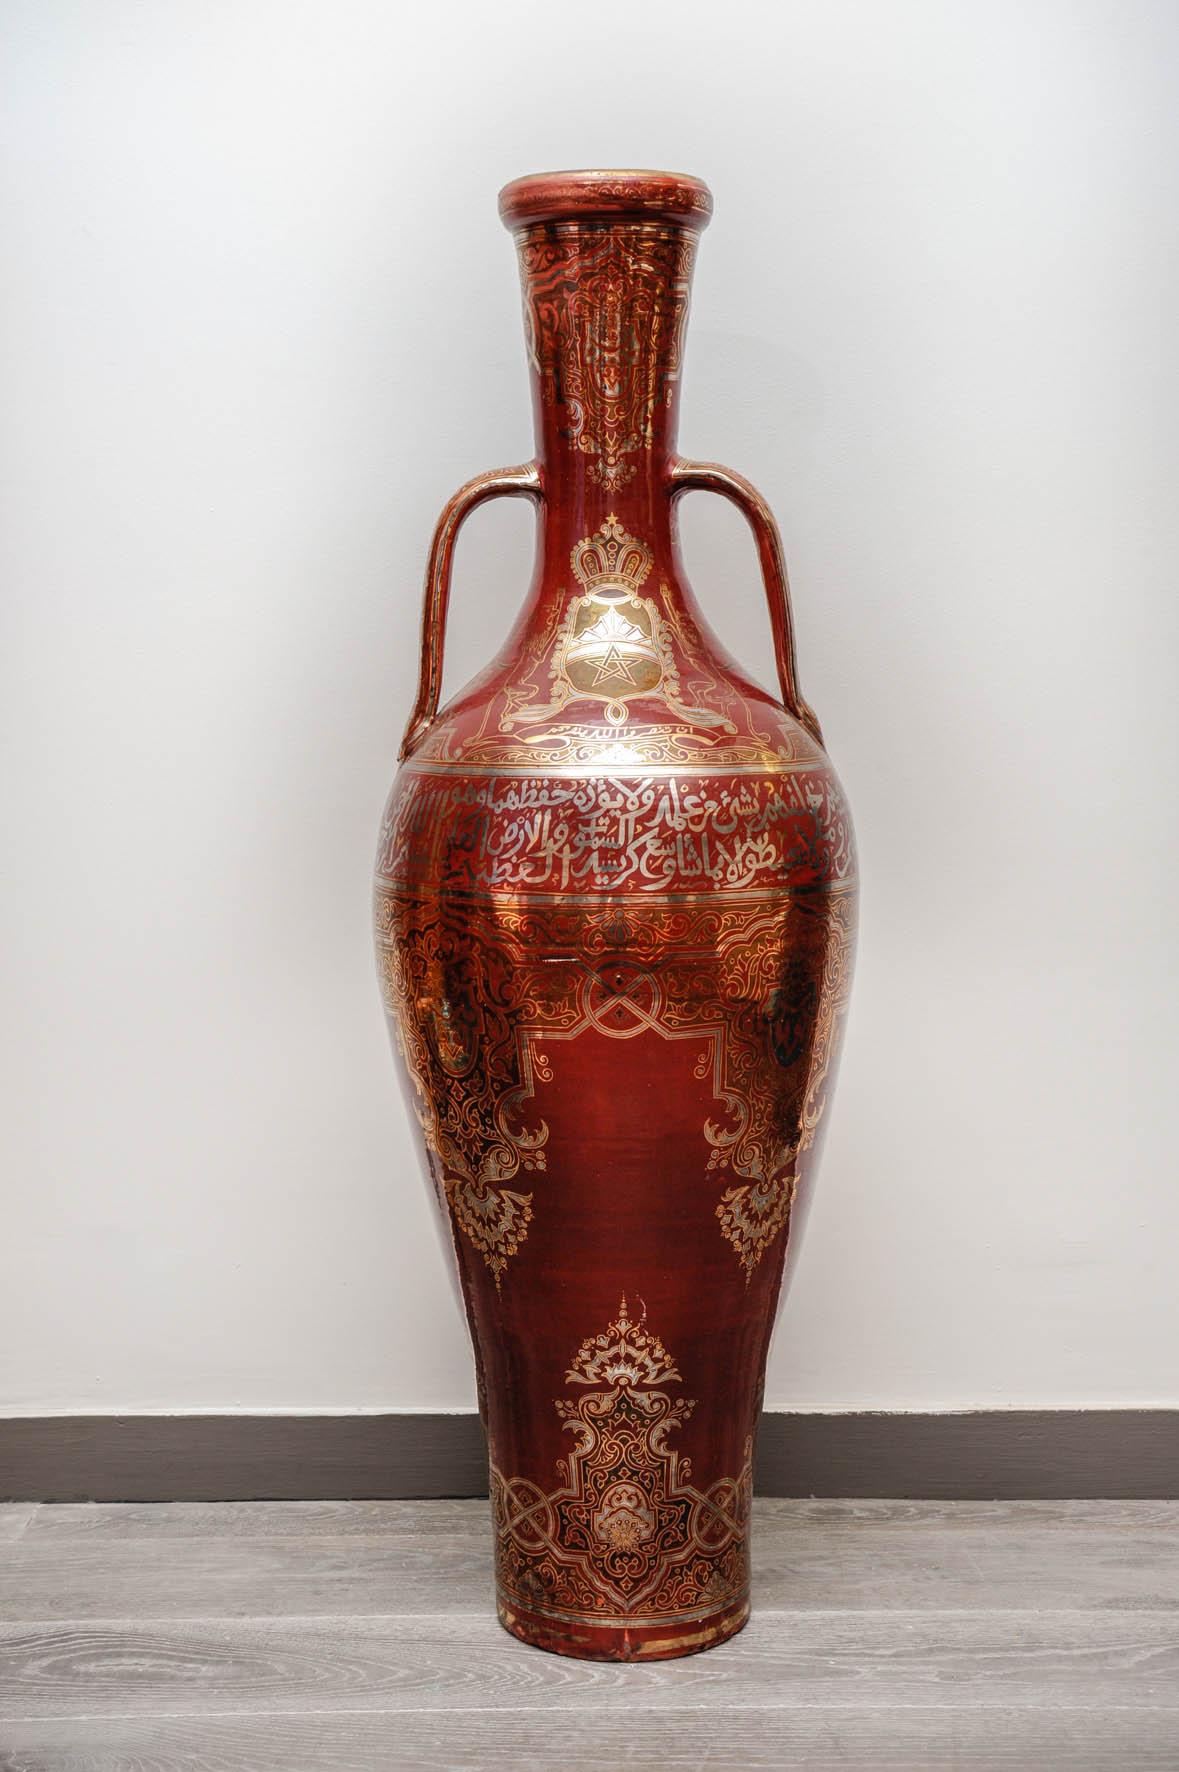 Exceptional and very large amphora with the coat of arms of Morocco.
Beautiful decoration with enamelled silver and gold with a deep red.
Signed by an artist under a handle.
A firing shrinkage on one face (see photos).